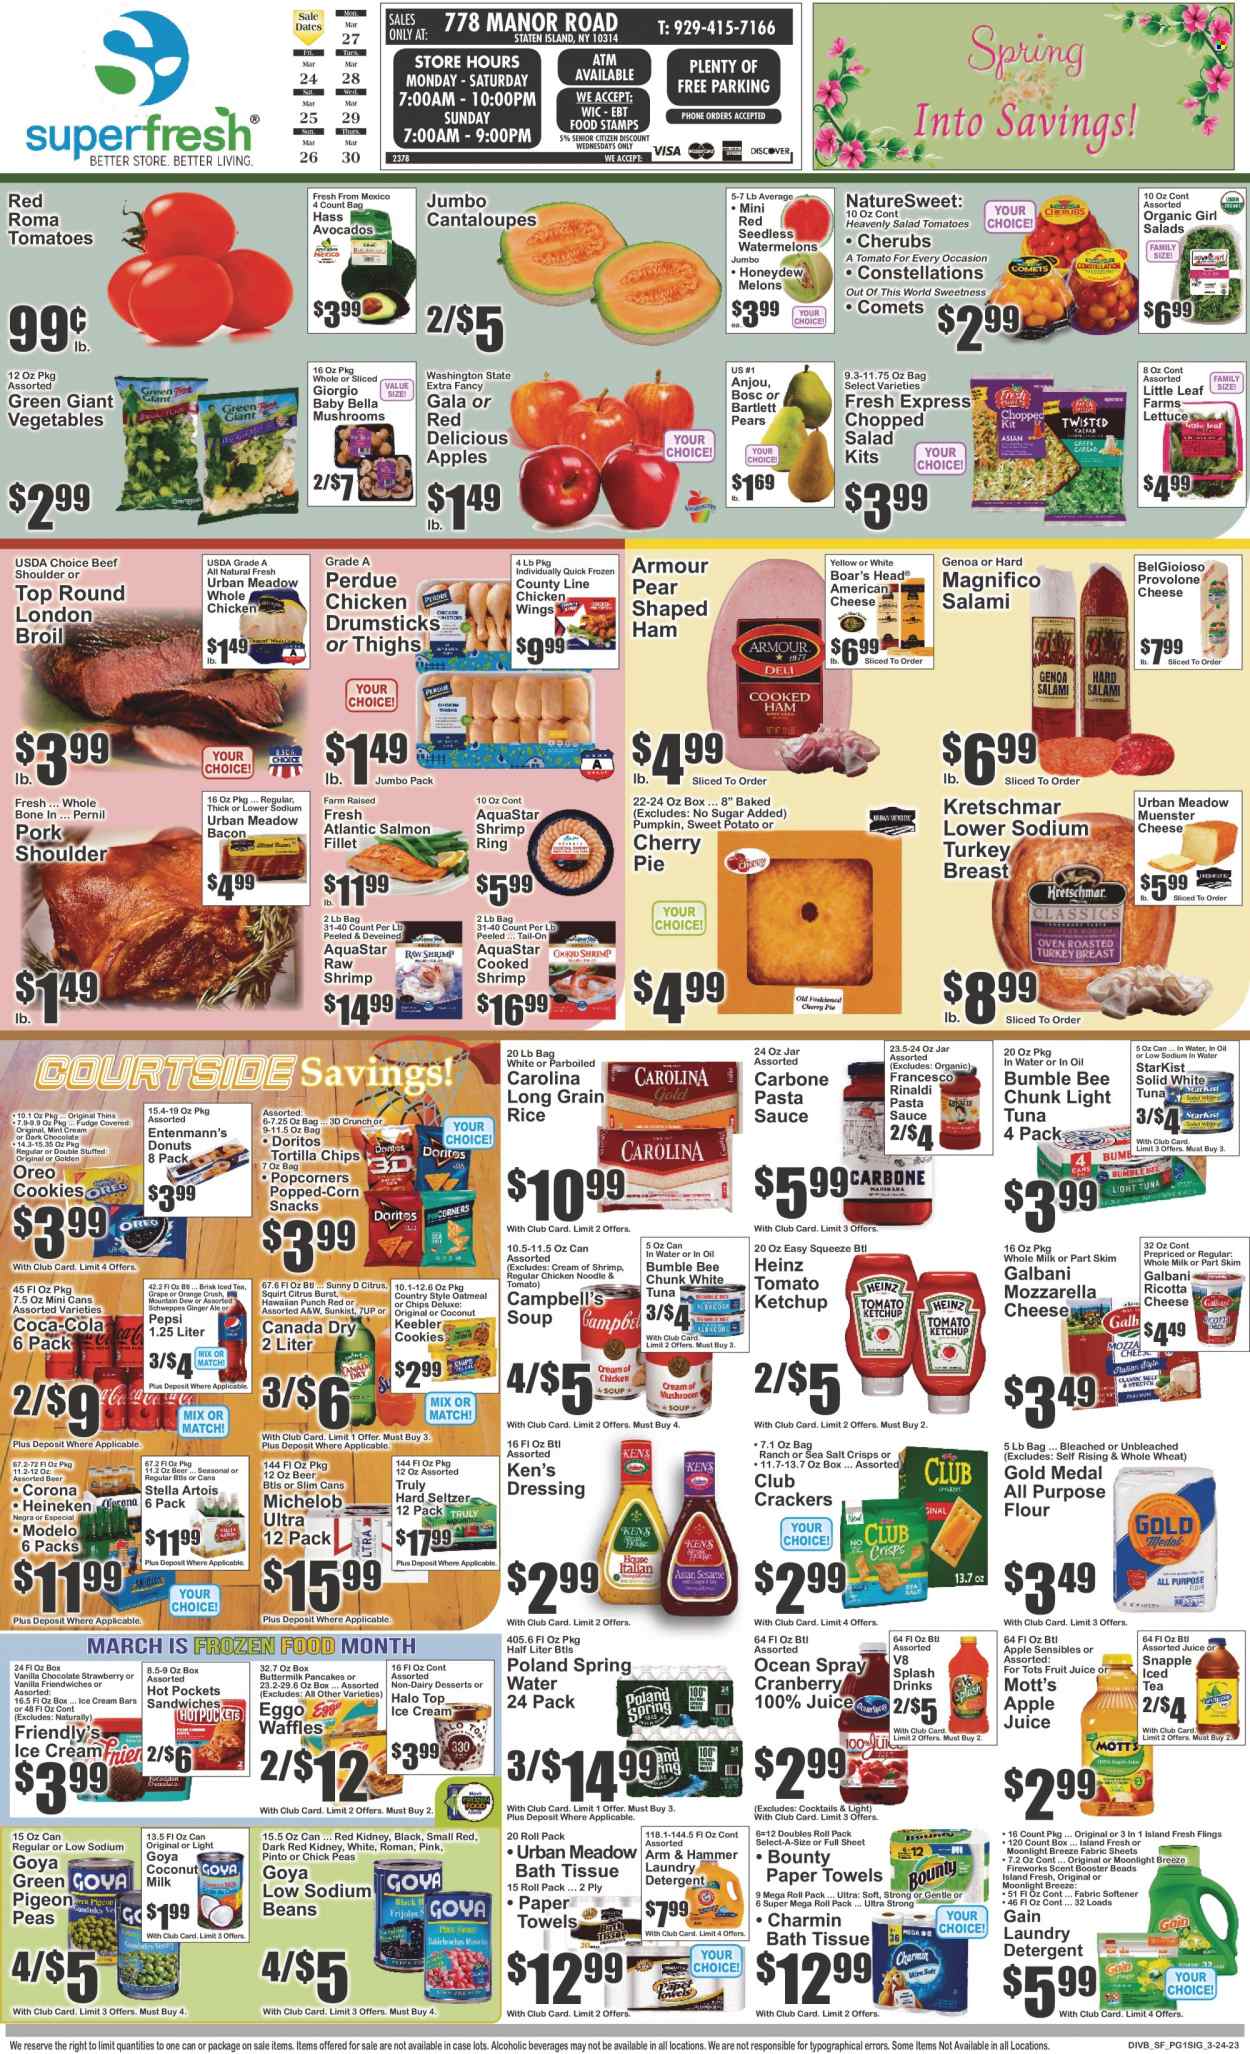 thumbnail - Super Fresh Flyer - 03/24/2023 - 03/30/2023 - Sales products - mushrooms, donut, waffles, Entenmann's, cherry pie, beans, cantaloupe, sweet potato, tomatoes, peas, lettuce, salad, chopped salad, avocado, Bartlett pears, Gala, Red Delicious apples, honeydew, cherries, oranges, Mott's, salmon, salmon fillet, tuna, shrimps, StarKist, Campbell's, hot pocket, pasta sauce, sandwich, soup, Bumble Bee, sauce, noodles, Perdue®, bacon, salami, ham, american cheese, mozzarella, ricotta, Münster cheese, Galbani, Provolone, Oreo, ice cream, ice cream bars, Friendly's Ice Cream, chicken wings, cookies, fudge, snack, Bounty, crackers, Keebler, Doritos, tortilla chips, Thins, popcorn, all purpose flour, ARM & HAMMER, oatmeal, coconut milk, Heinz, light tuna, Goya, rice, toor dal, long grain rice, ketchup, dressing, apple juice, Canada Dry, ginger ale, Mountain Dew, Schweppes, Pepsi, juice, fruit juice, ice tea, 7UP, Snapple, A&W, spring water, water, Hard Seltzer, TRULY, beer, Stella Artois, Corona Extra, Heineken, Modelo, whole chicken, chicken drumsticks, chicken, pork meat, pork shoulder, bath tissue, Plenty, kitchen towels, paper towels, Charmin, detergent, Gain, fabric softener, laundry detergent, melons, Michelob. Page 1.